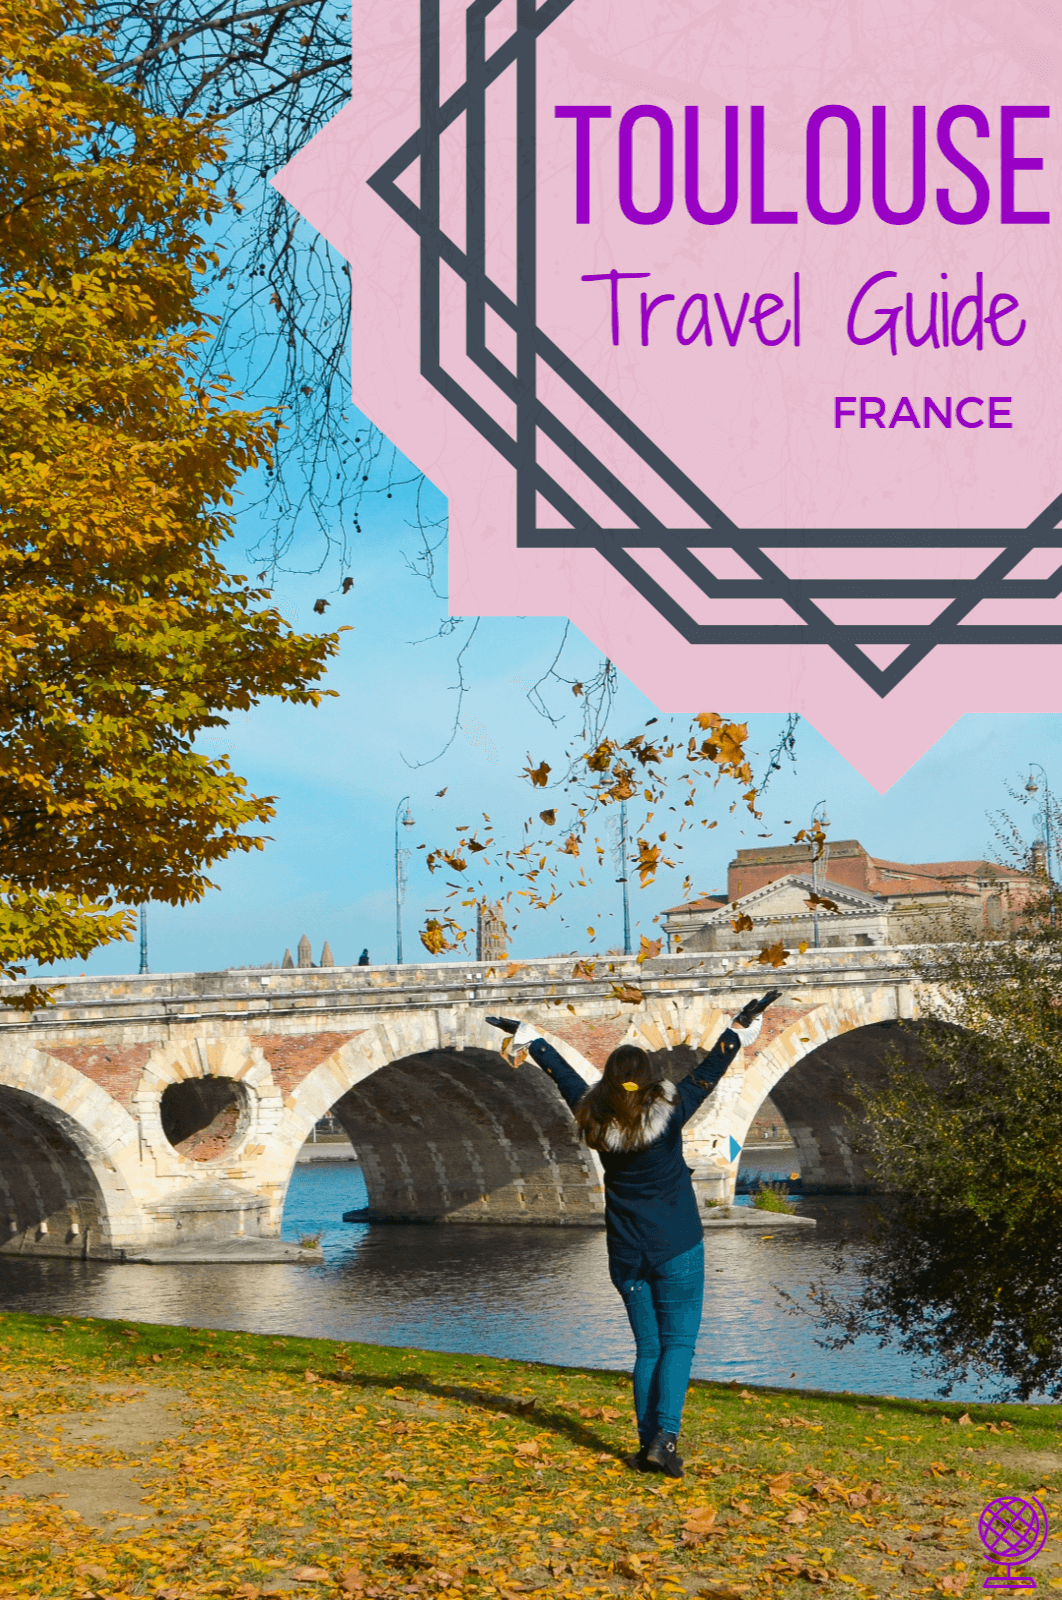 Toulouse travel guide by The Travelling Stomach